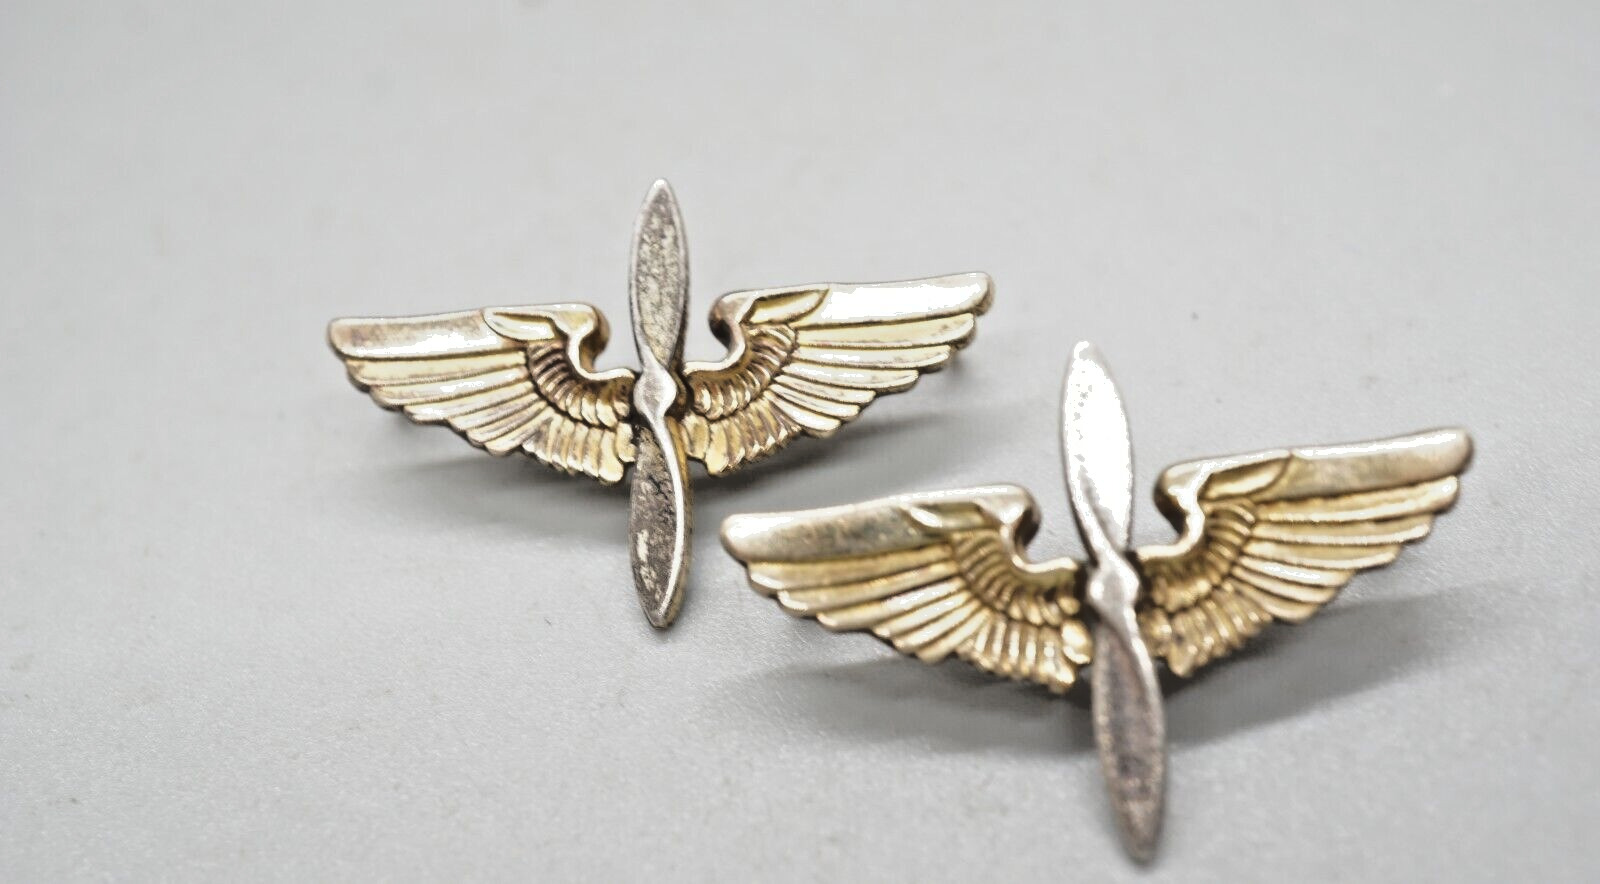 WWII 1/20 10K Gold Army Air Forces Pilot Wings Insignia Pins Set by Smilo